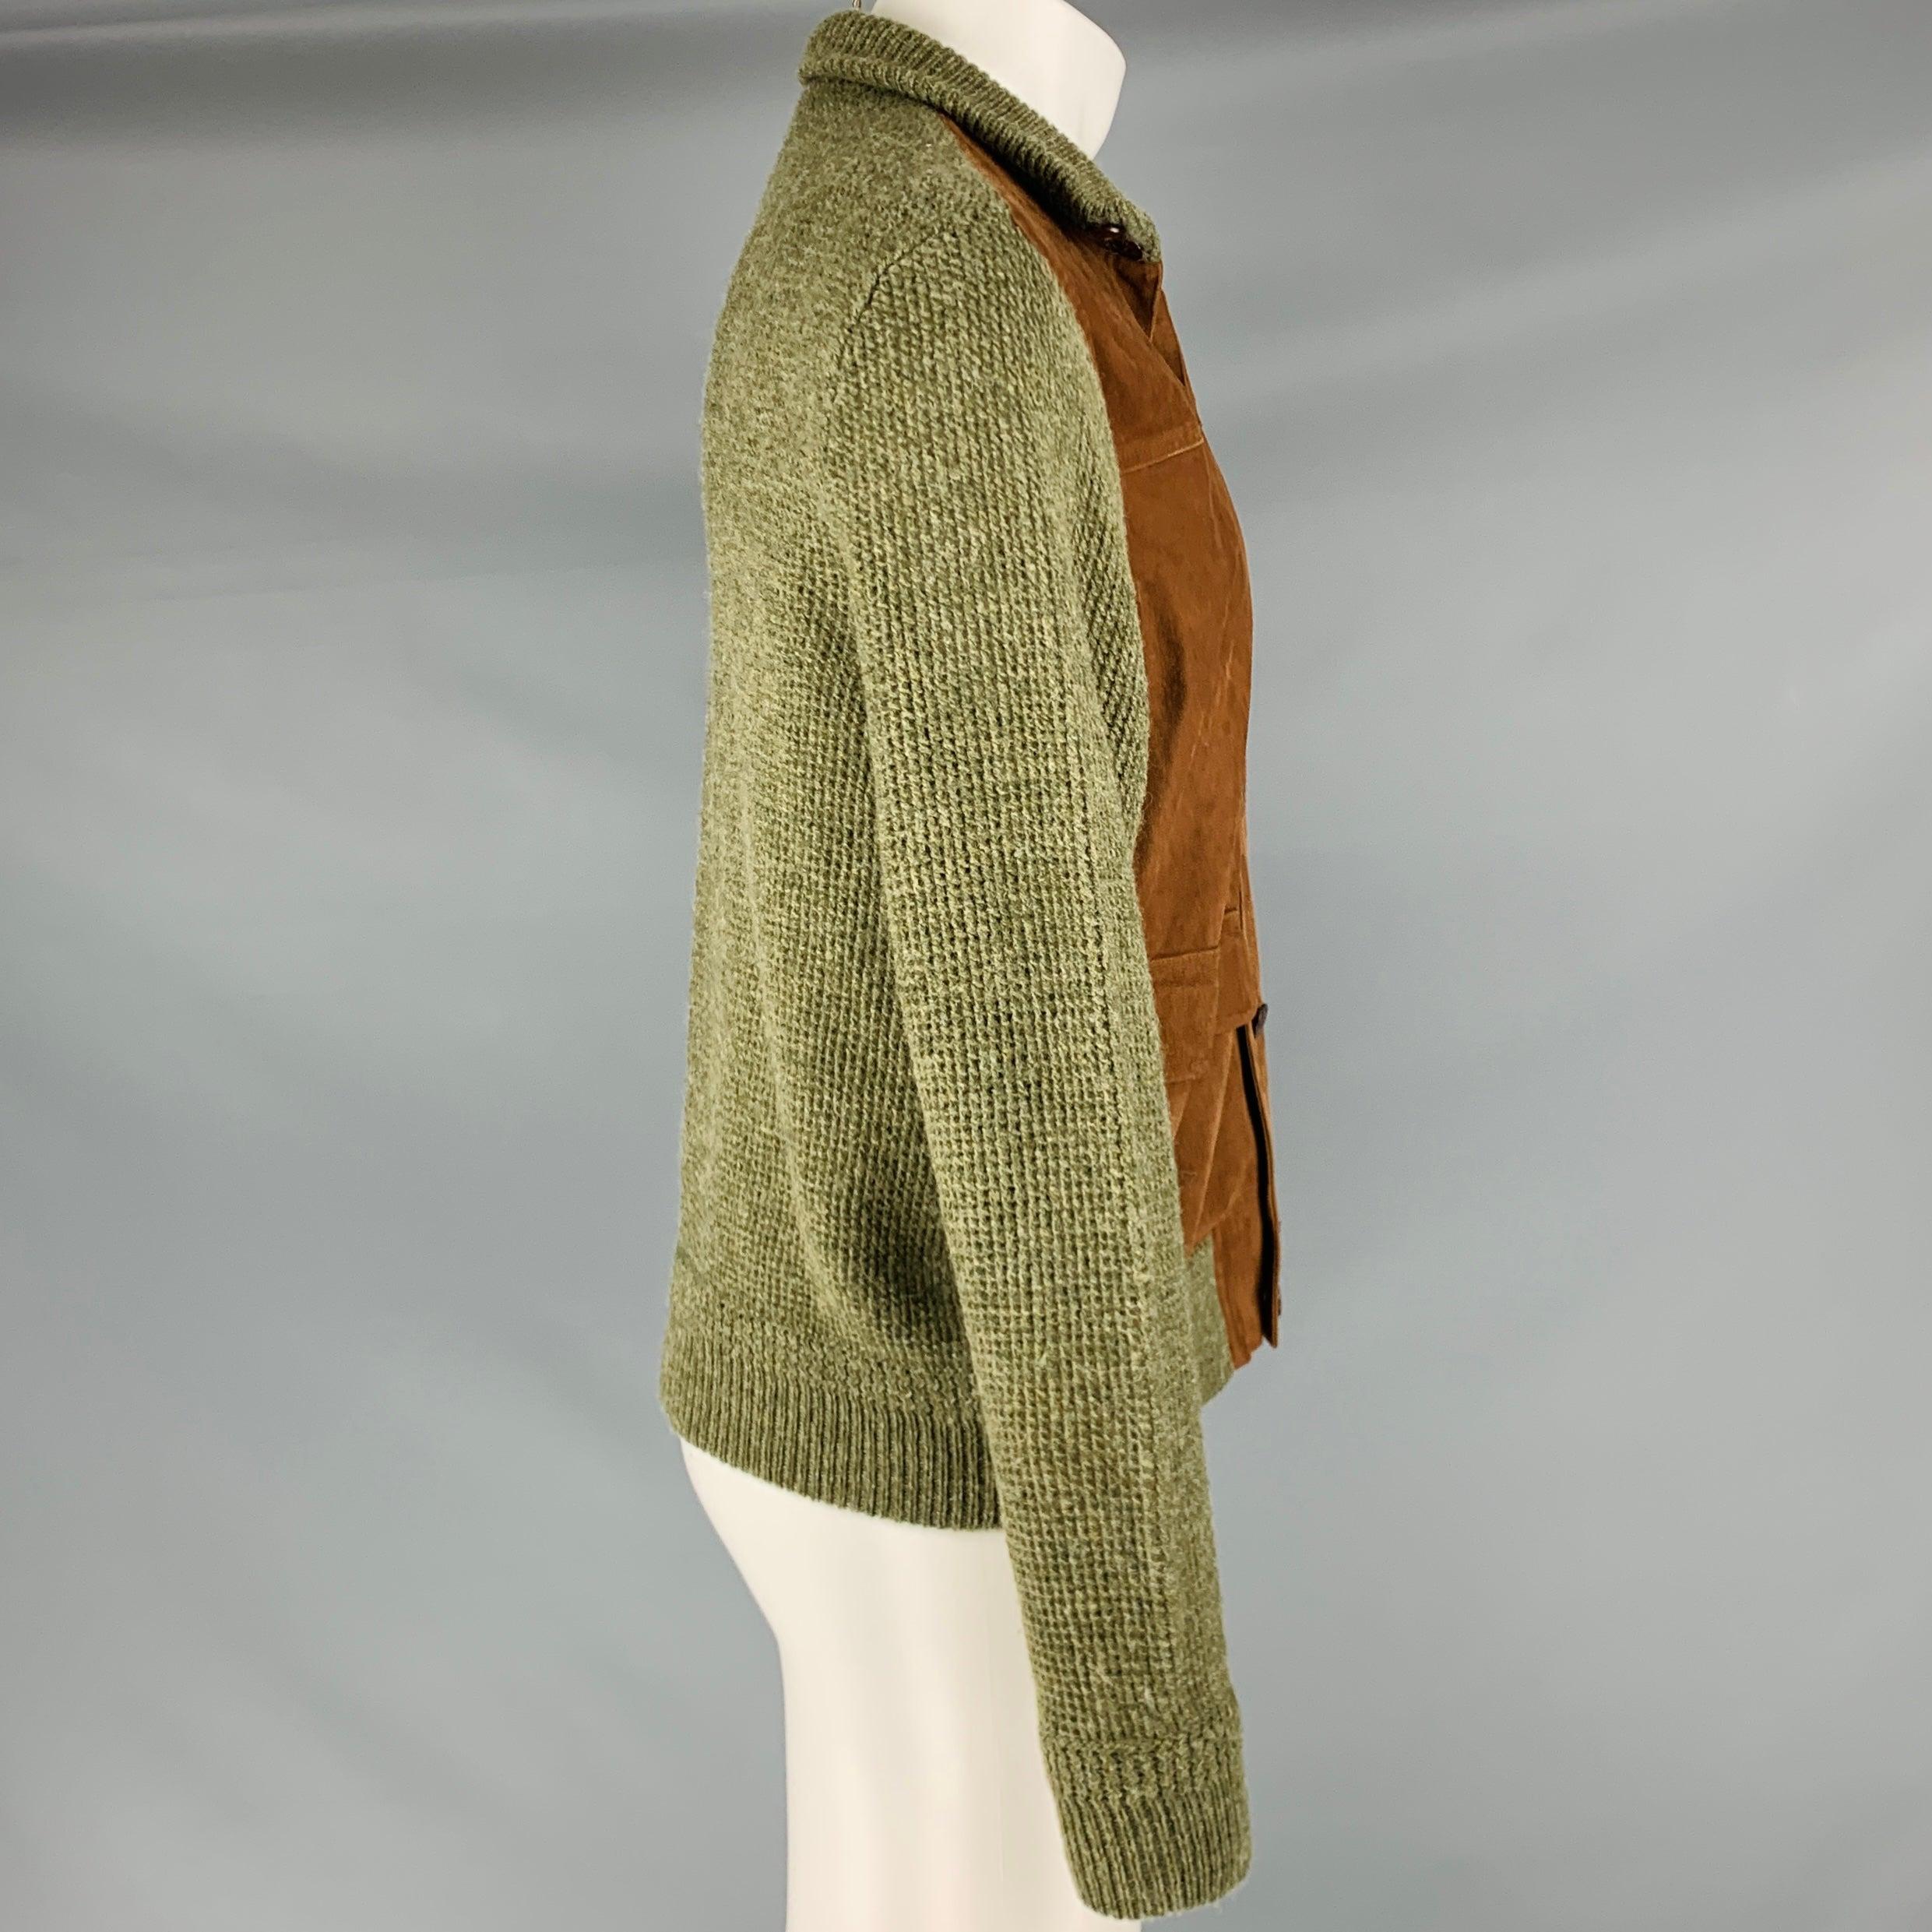 RALPH LAUREN jacket
in an olive green wool knit featuring a brown suede front, two buttoned pockets, and button closure. Made in Italy.Very Good Pre-Owned Condition. Minor signs of wear. 

Marked:   44 

Measurements: 
 
Shoulder: 18 inches Chest: